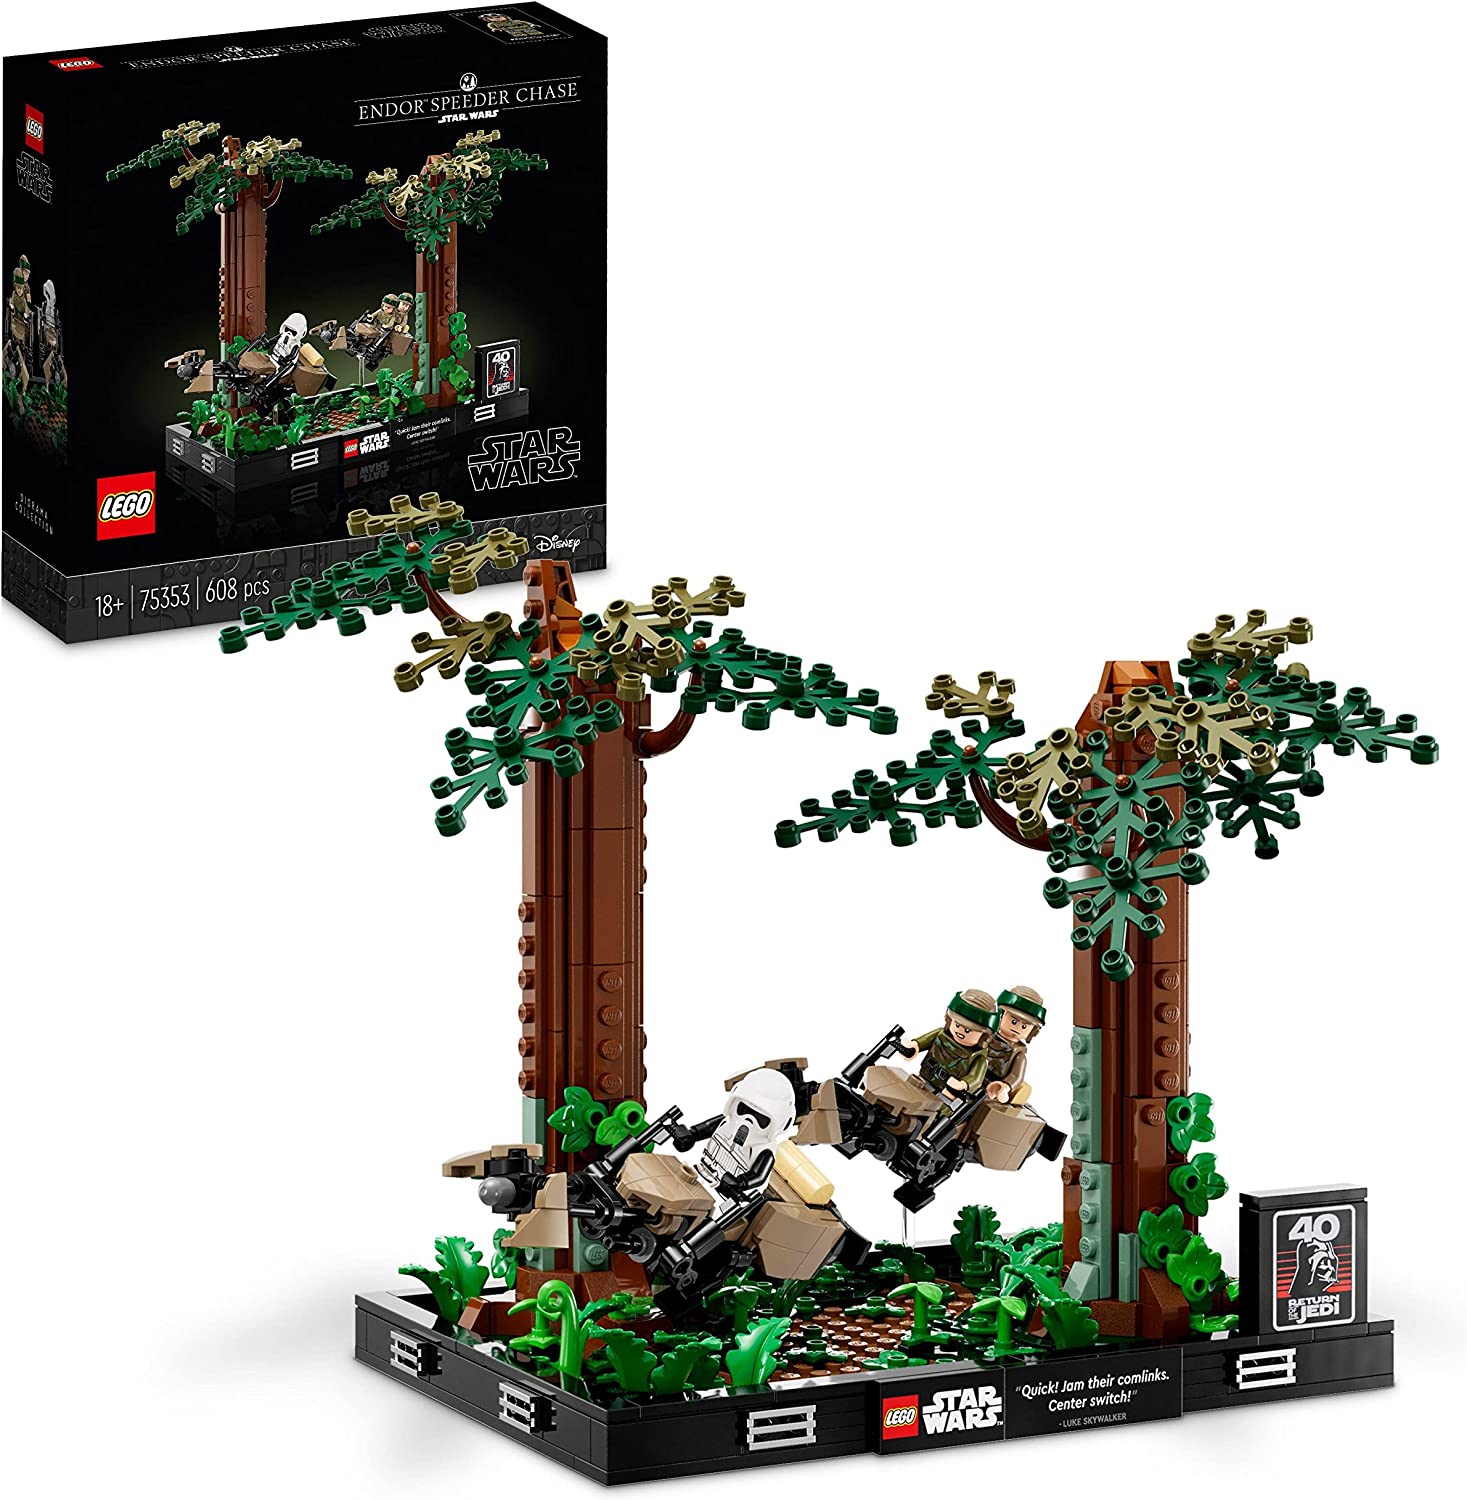 LEGO 75353 Star Wars Chase on Endor - Diorama Set, Return of the Jedi with Luke Skywalker, Princess Leia & Scout Trooper and Speeder Bikes, 40th Anniversary